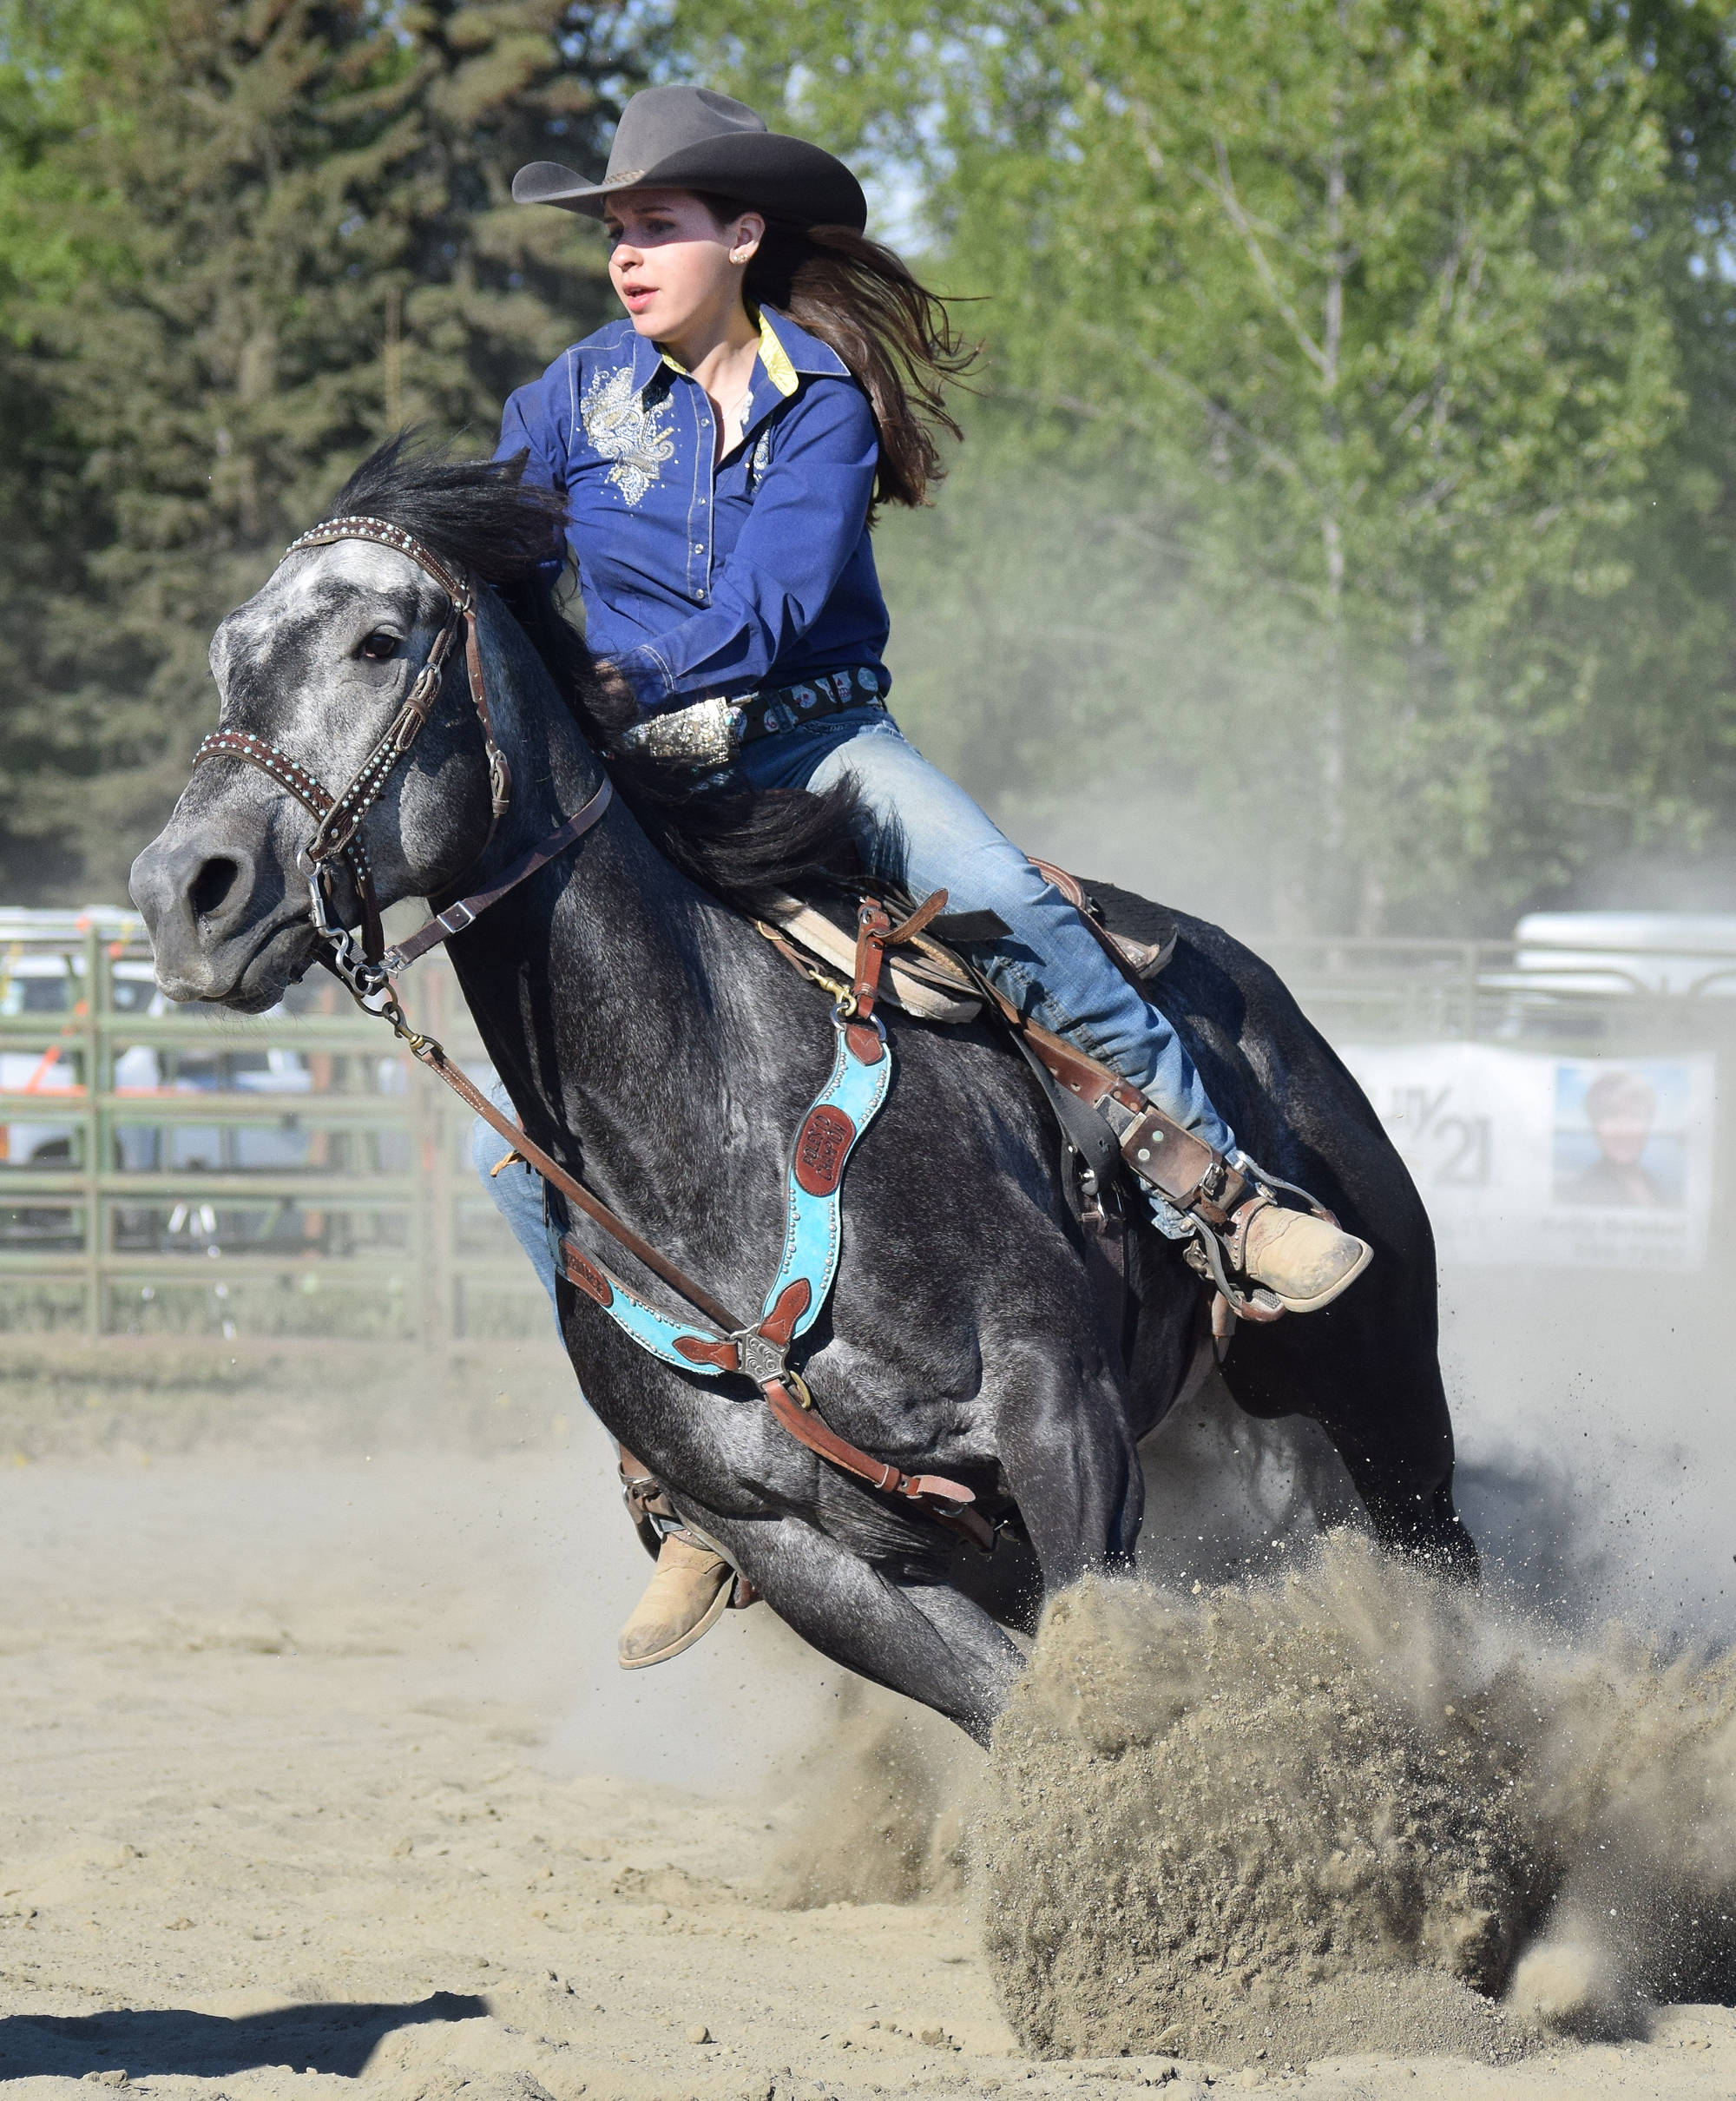 Katy Jones guides her horse in the right direction in the barrel racing event June 3 at the Soldotna Rodeo Series at the Soldotna Rodeo Grounds. Photo by Joey Klecka/Peninsula Clarion